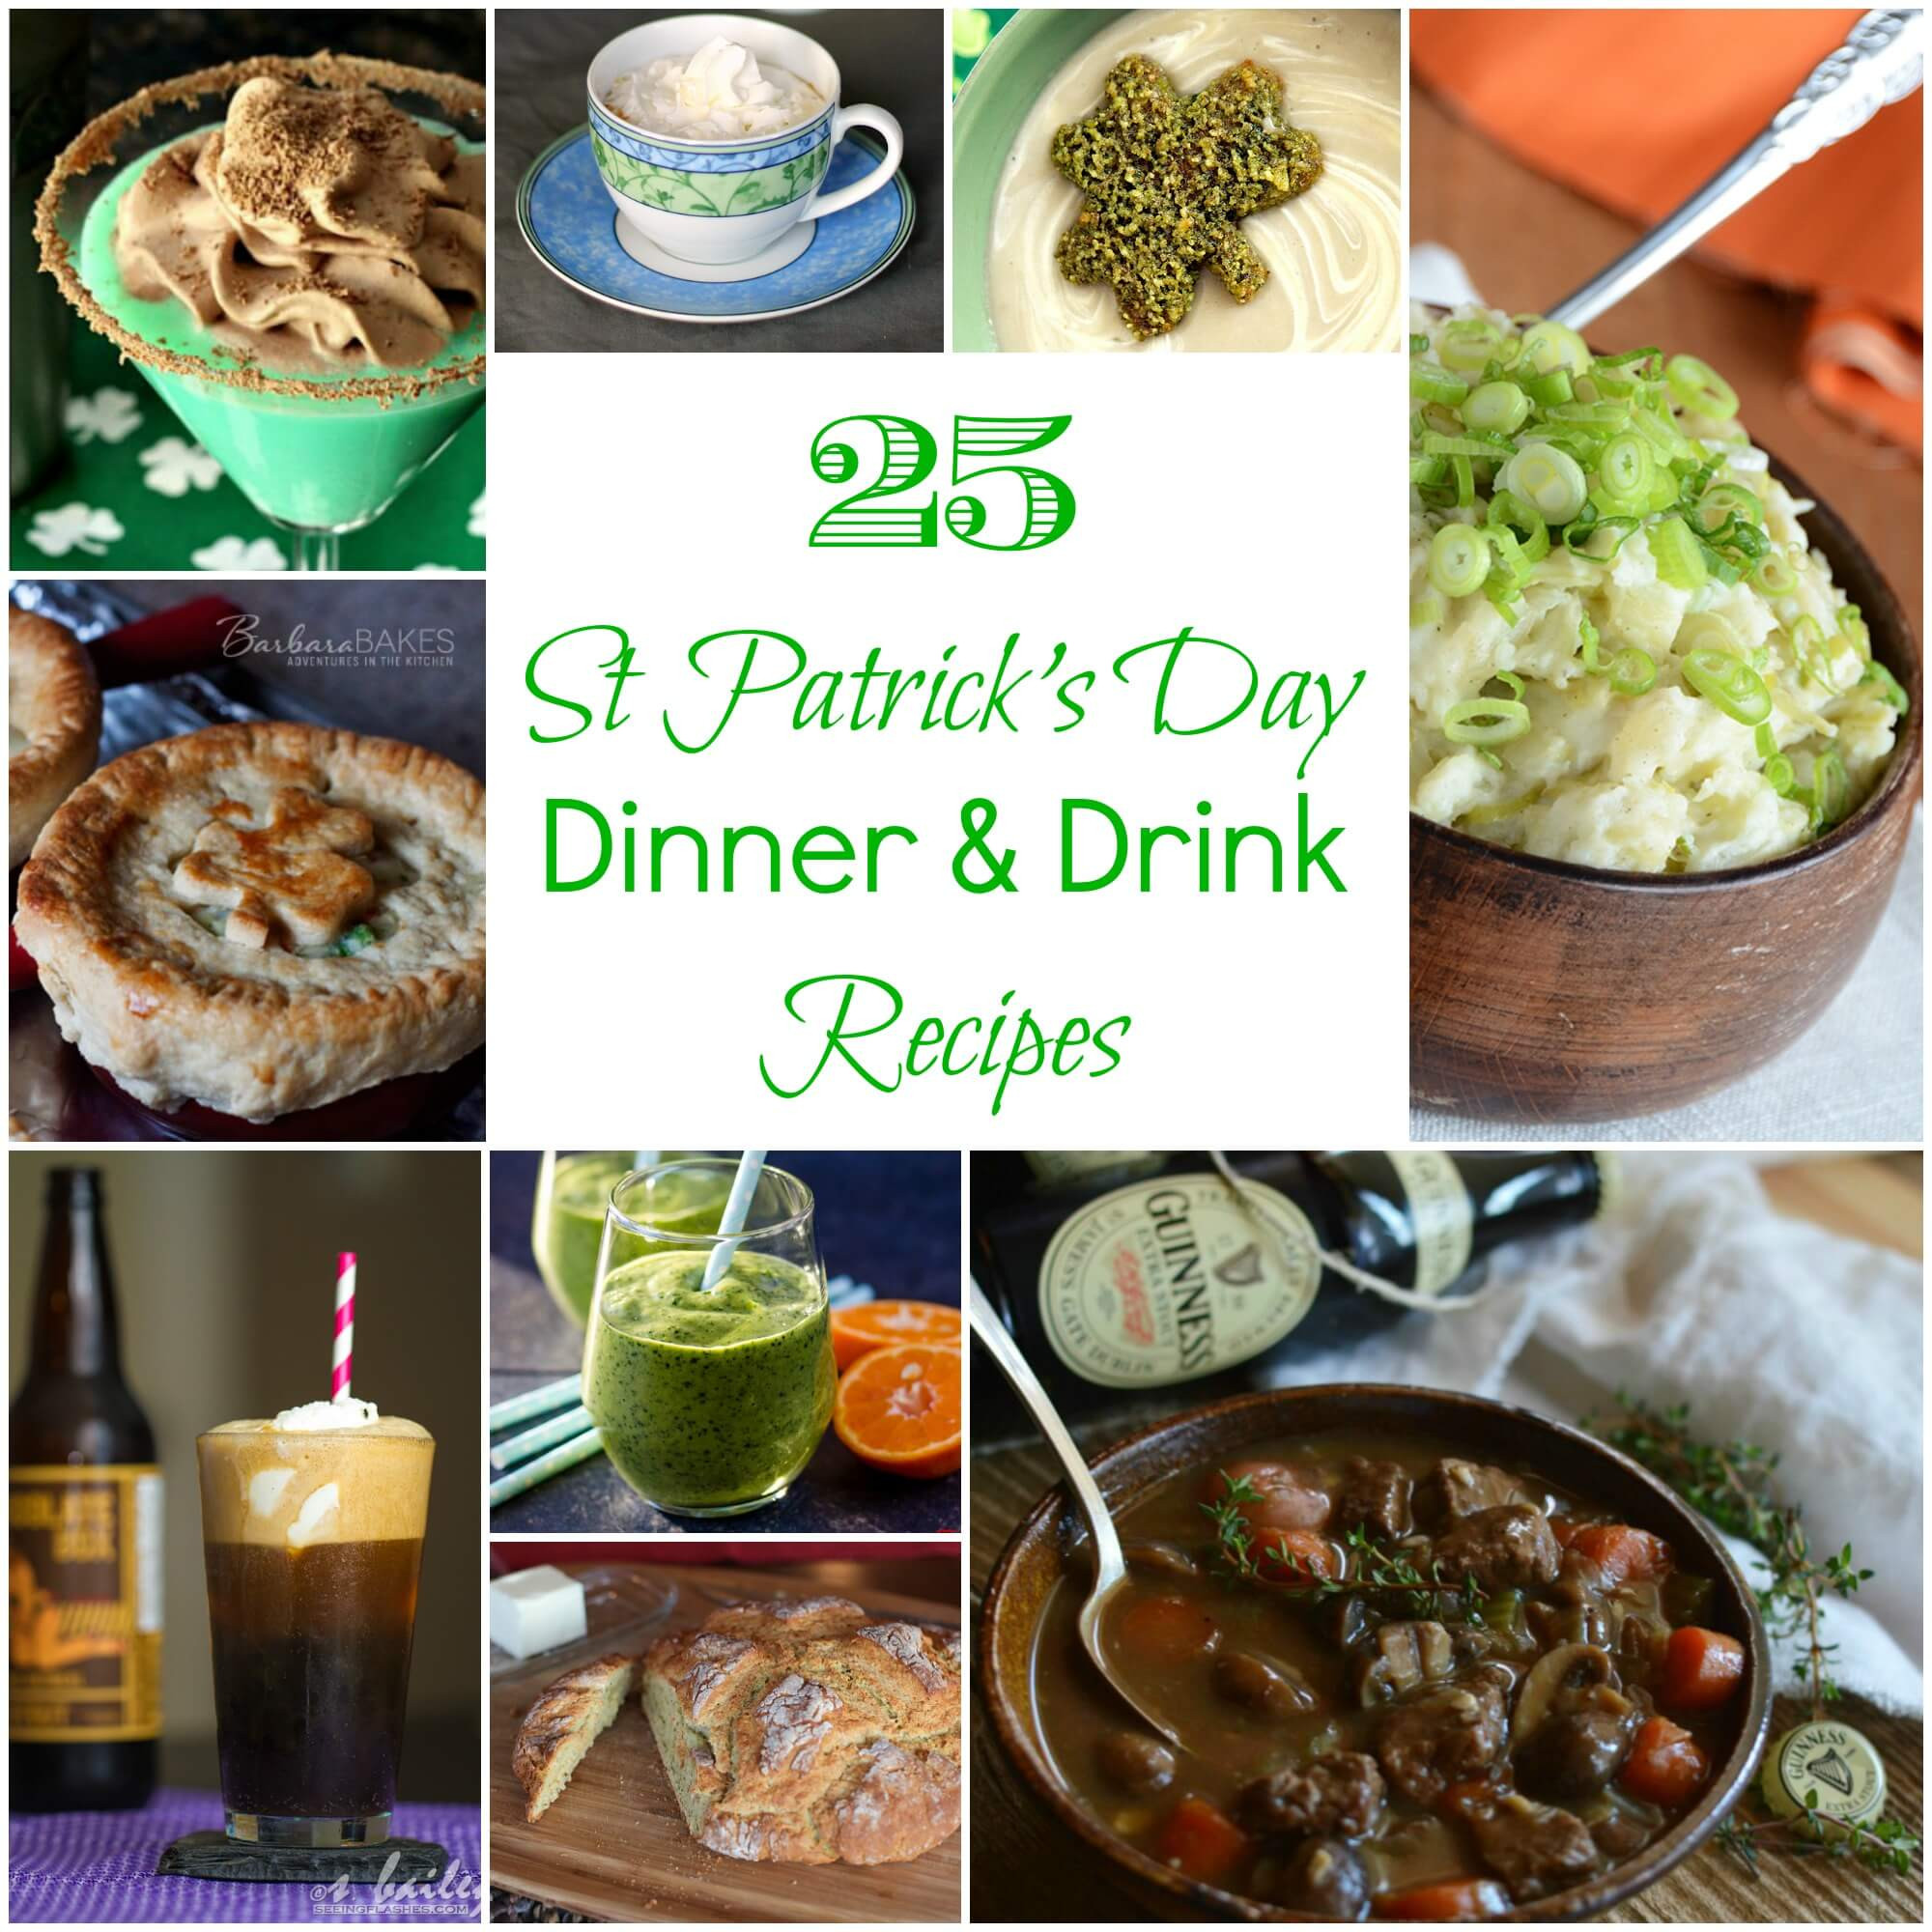 St Patrick's Day Brunch Ideas
 25 St Patrick s Day Dinner & Drink Recipes Flavor Mosaic